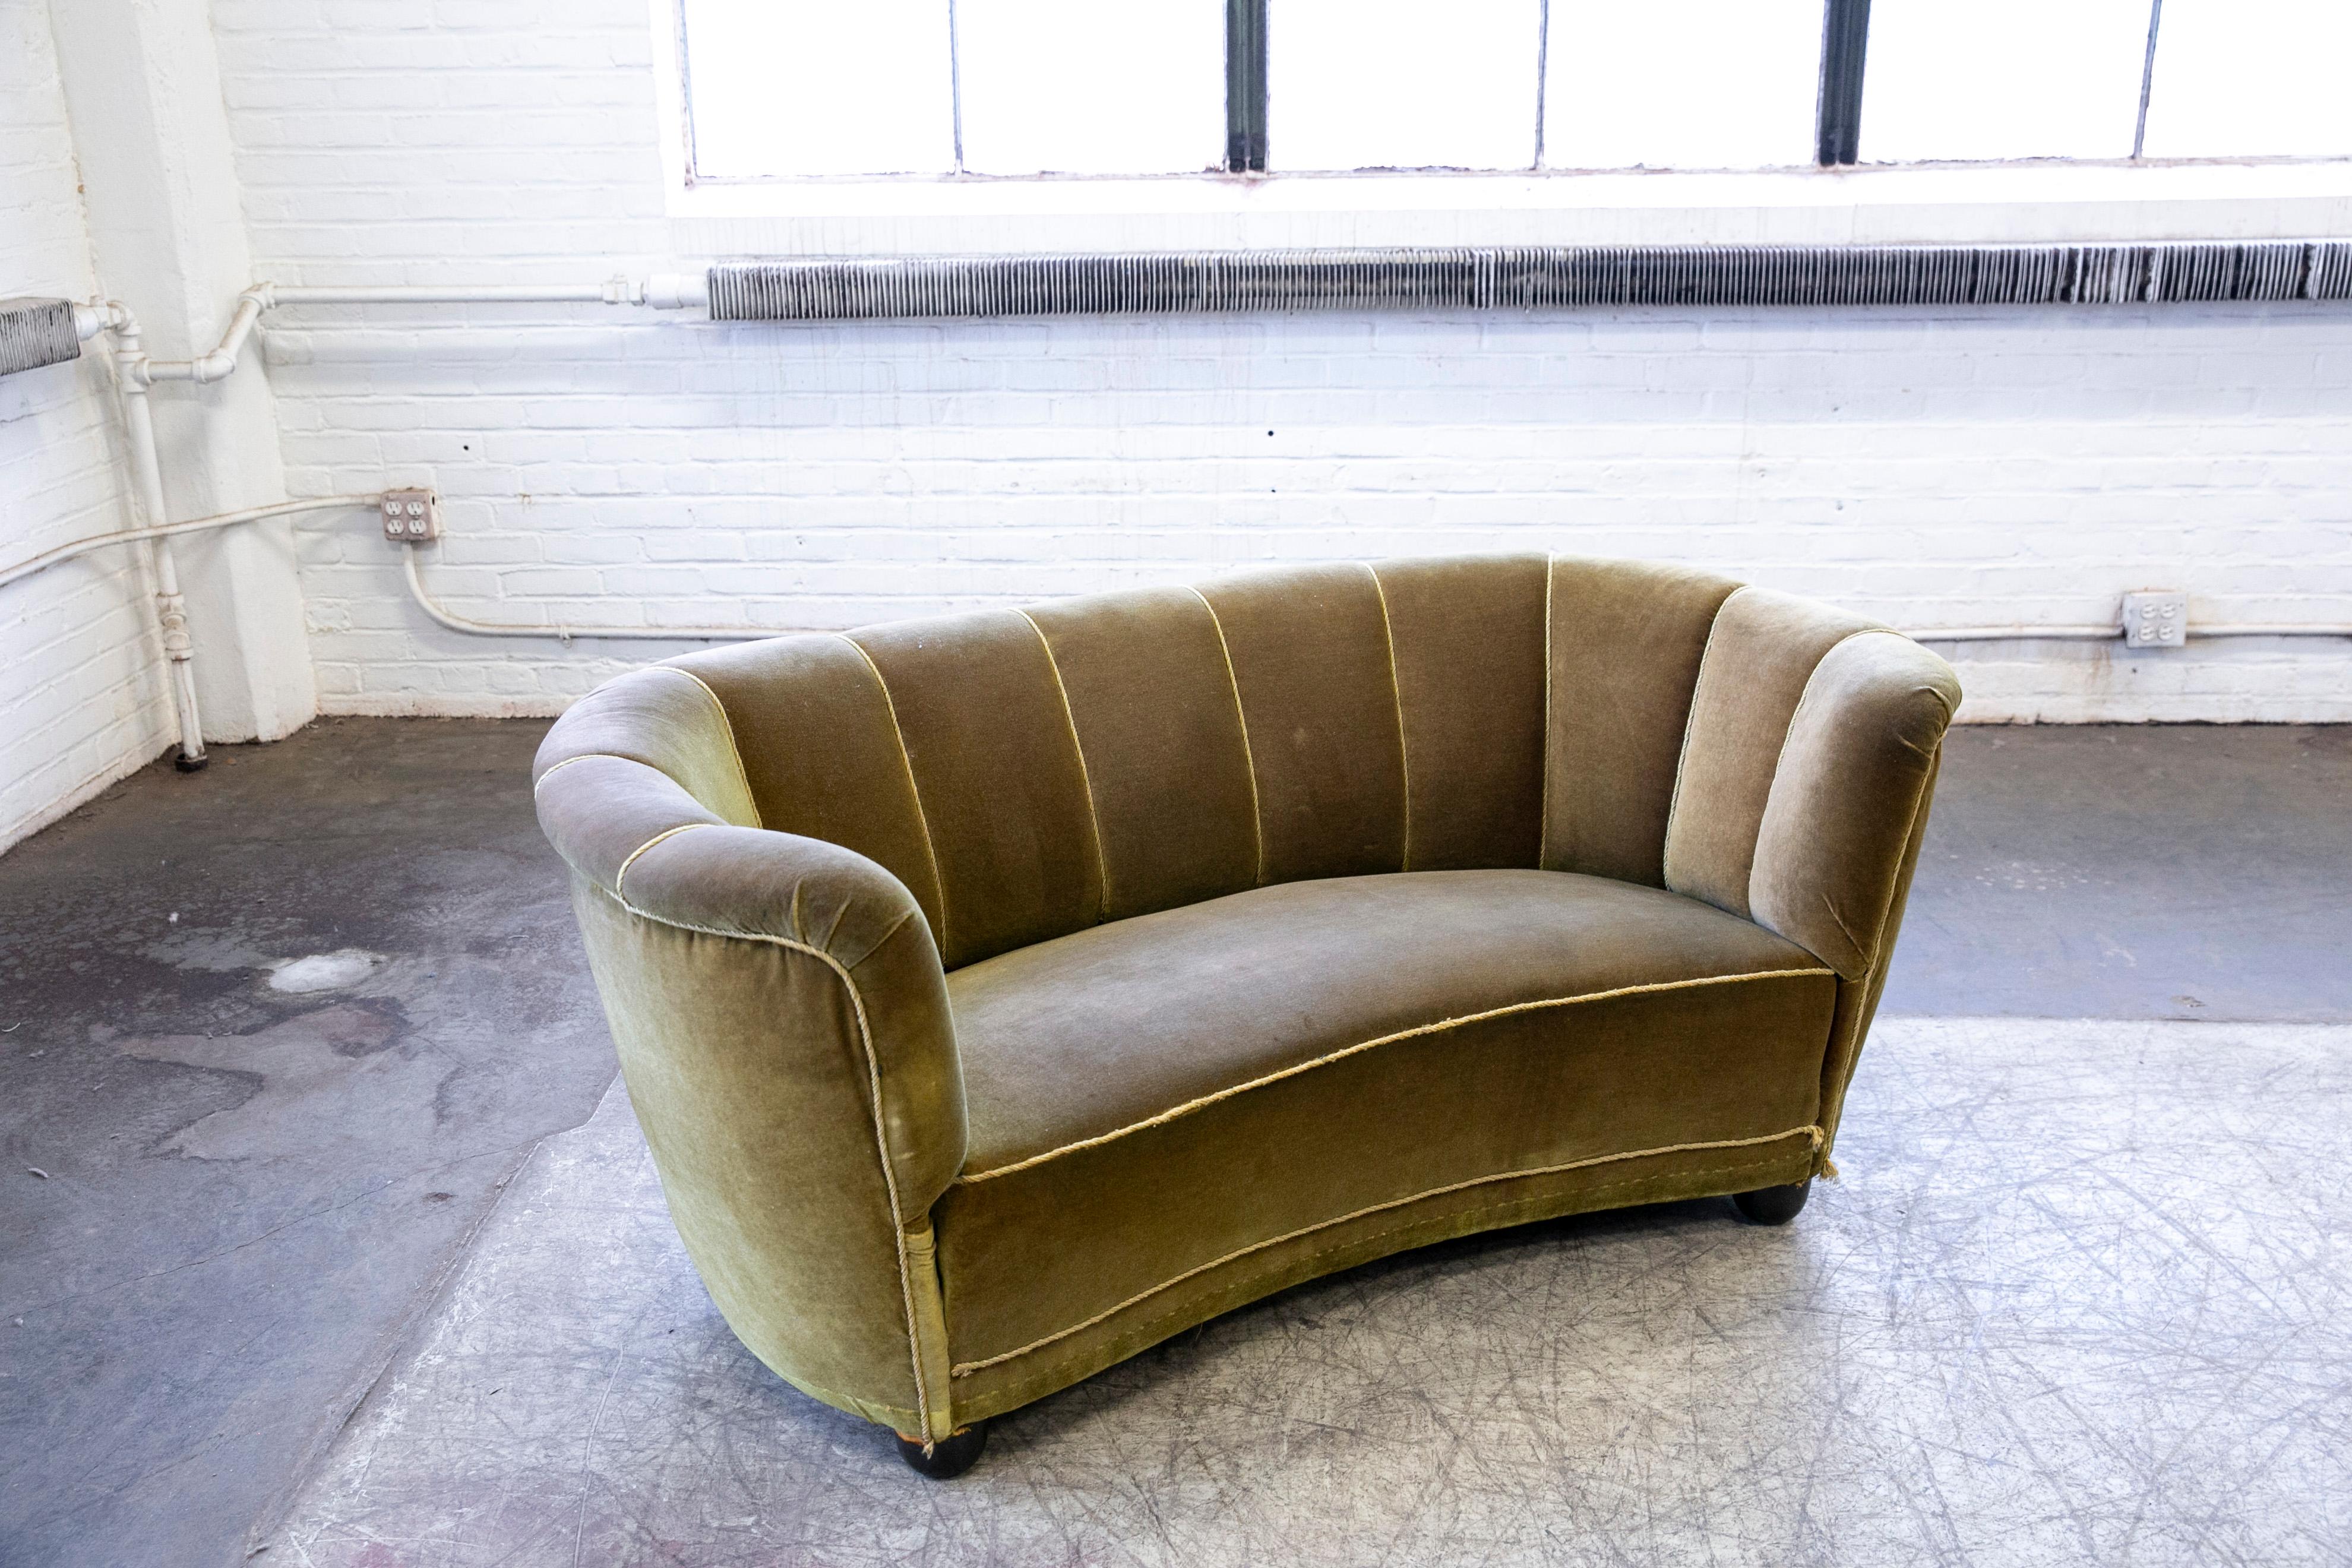 Viggo Boesen style banana shaped or curved Loveseat made in Denmark, around late 1930's or early 1940's. This small sofa will make a strong statement in any room. Beautiful round voluptuous lines and solid round legs. The original fabric is